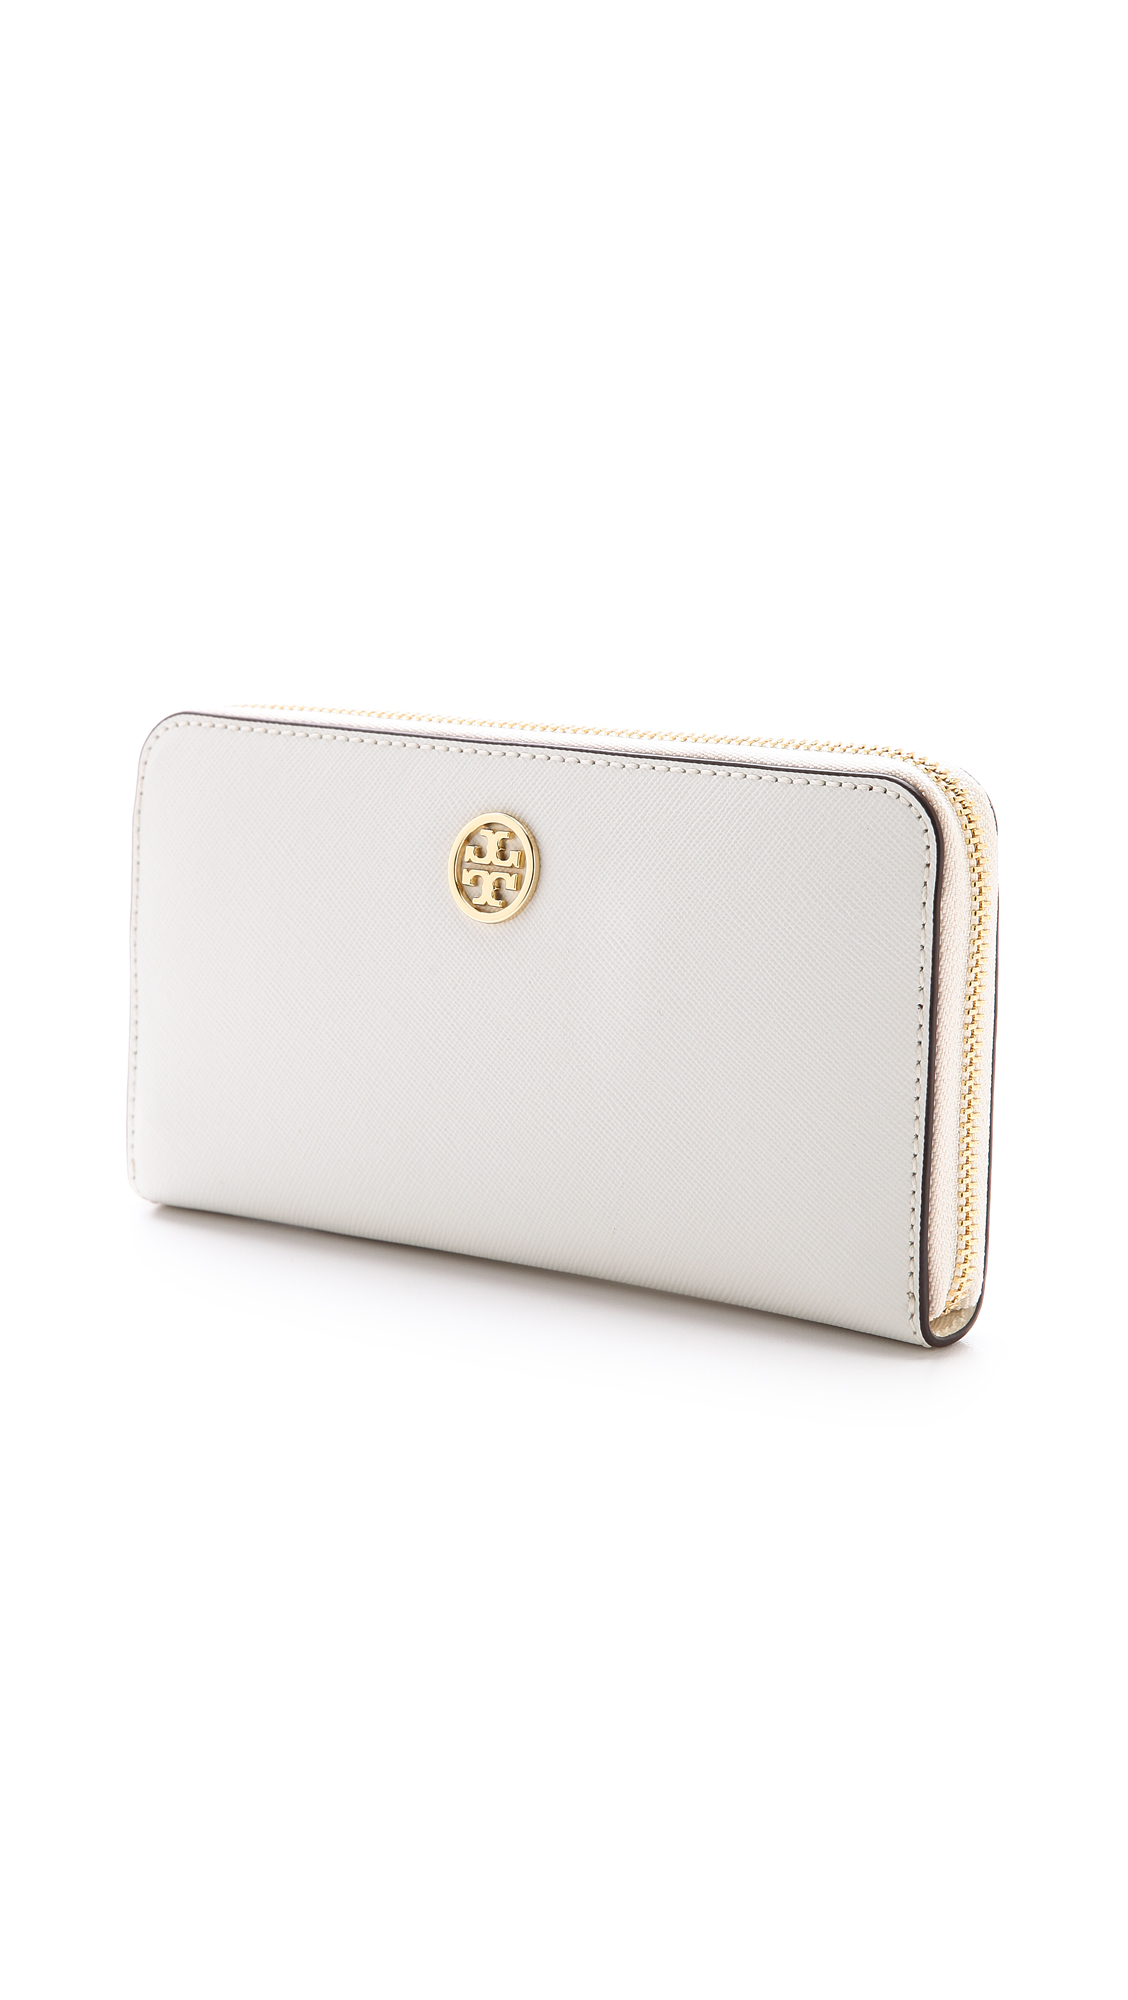 Tory Burch Robinson Zip Continental Wallet in White | Lyst